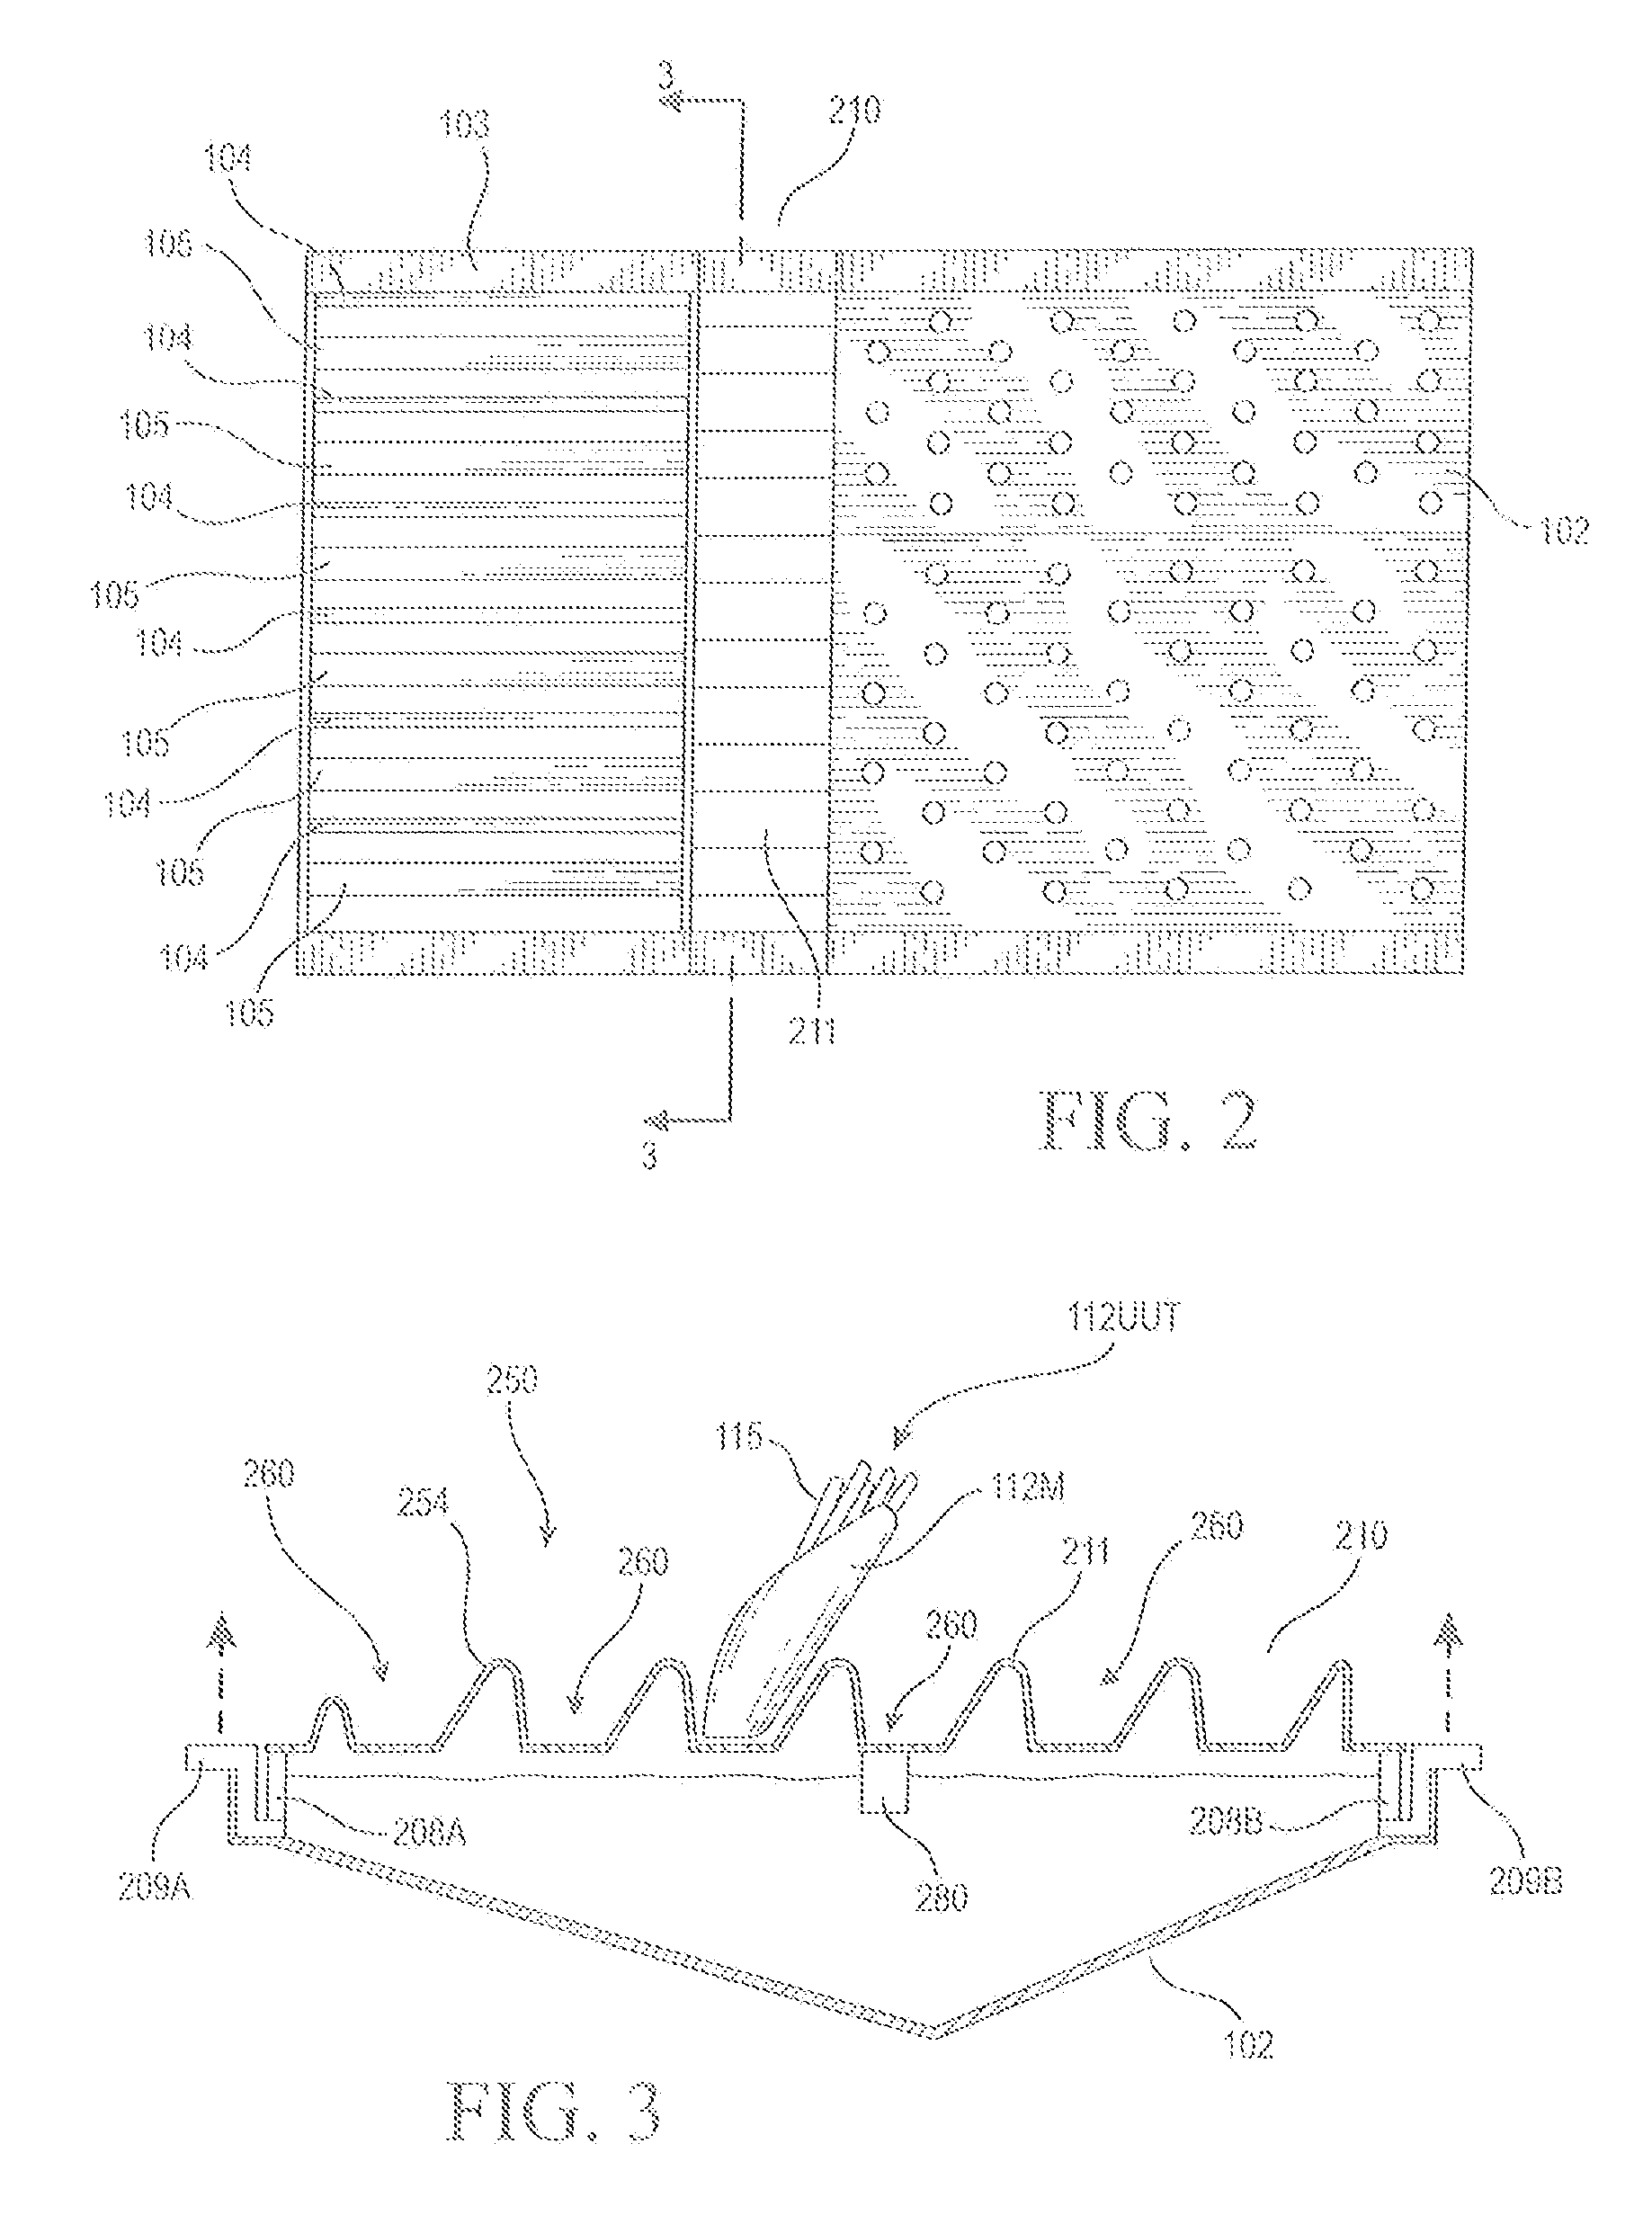 Fry station with integral portion weight sensing system and method